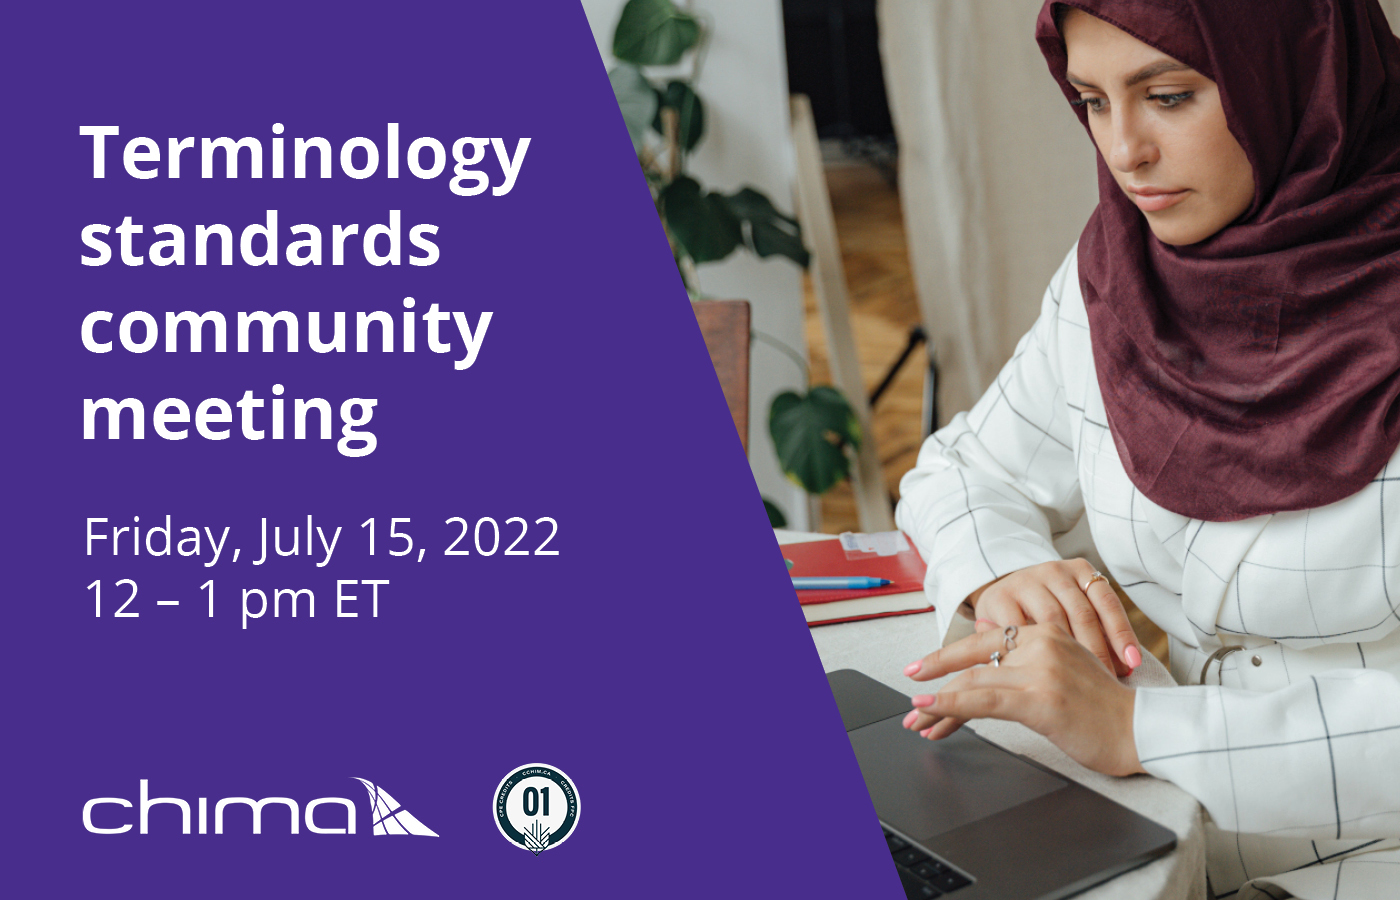 Terminology standards community meeting, Friday, July 15, 2022 from 12:00 - 1:00 pm ET. written in white text on a purple slant background taking up half of the image. Below the text sits the CHIMA logo and beside that is a 1 CPE credit stamp. To the right of the purple block is a woman wearing a burgundy hijab and a white and black blazer jacket. She is working on her laptop in a home setting. 